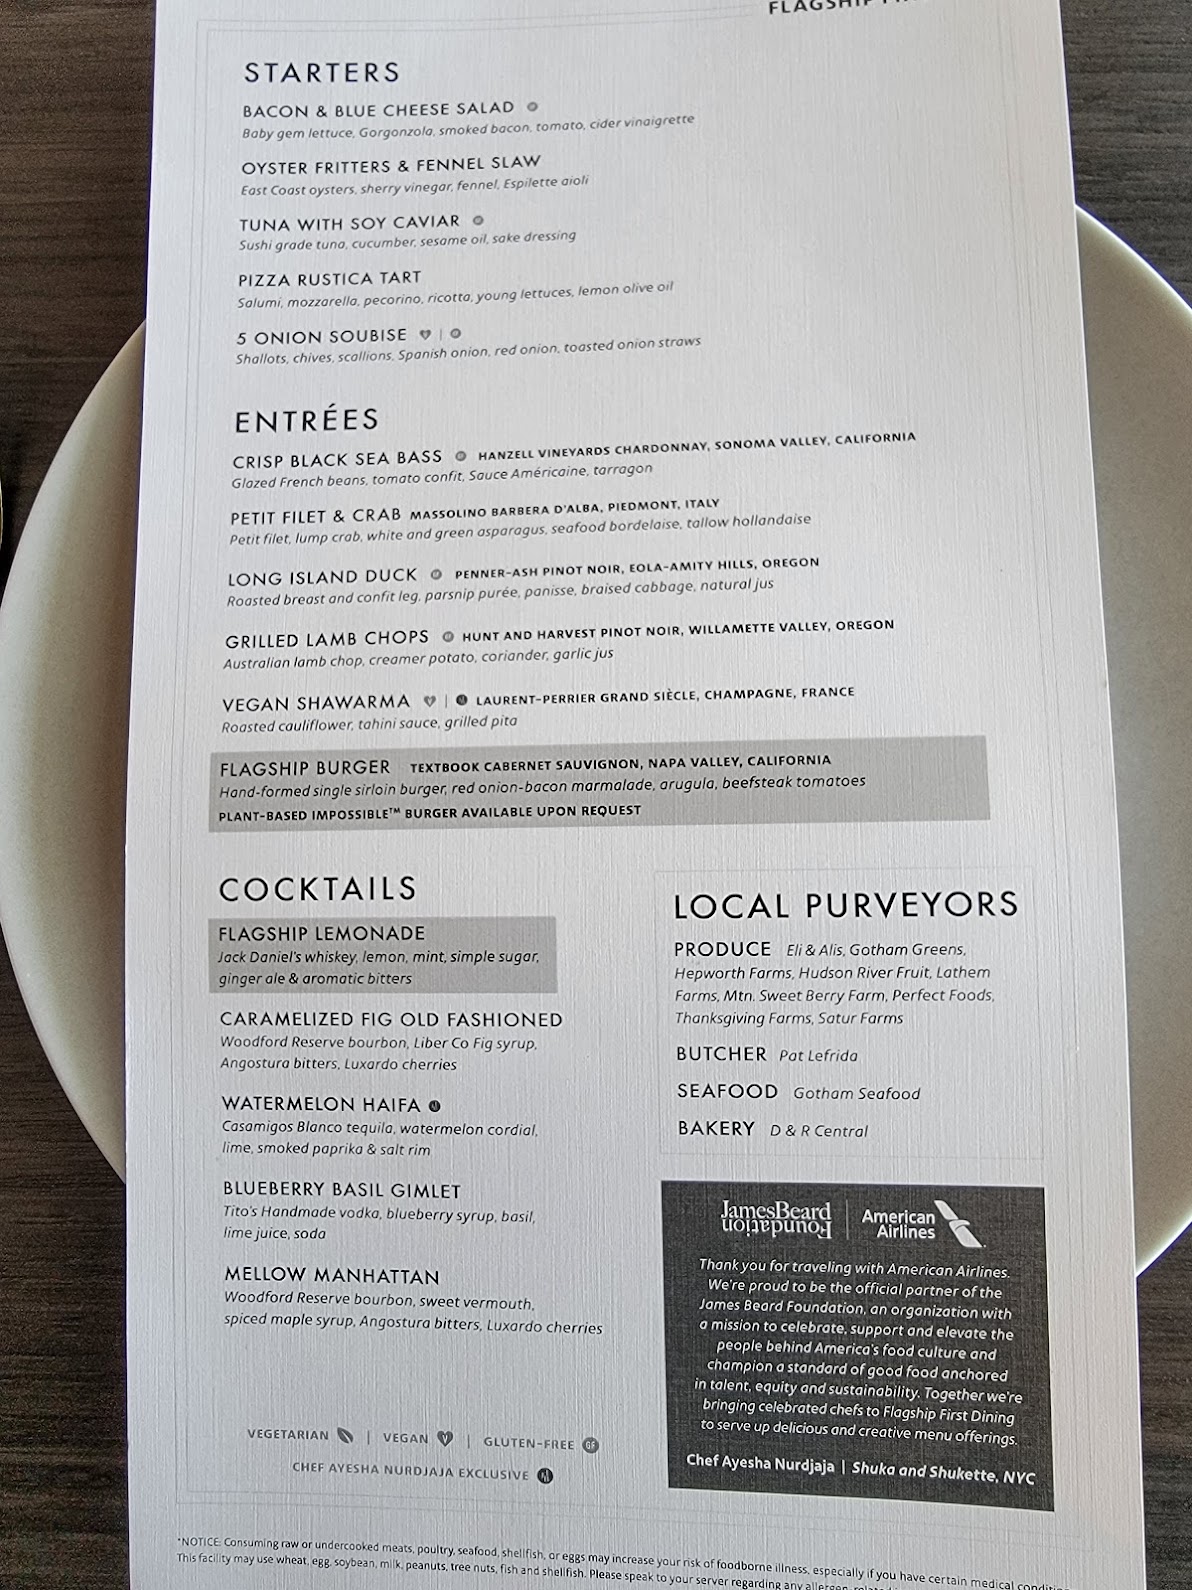 american airlines flagship first dining jfk menu